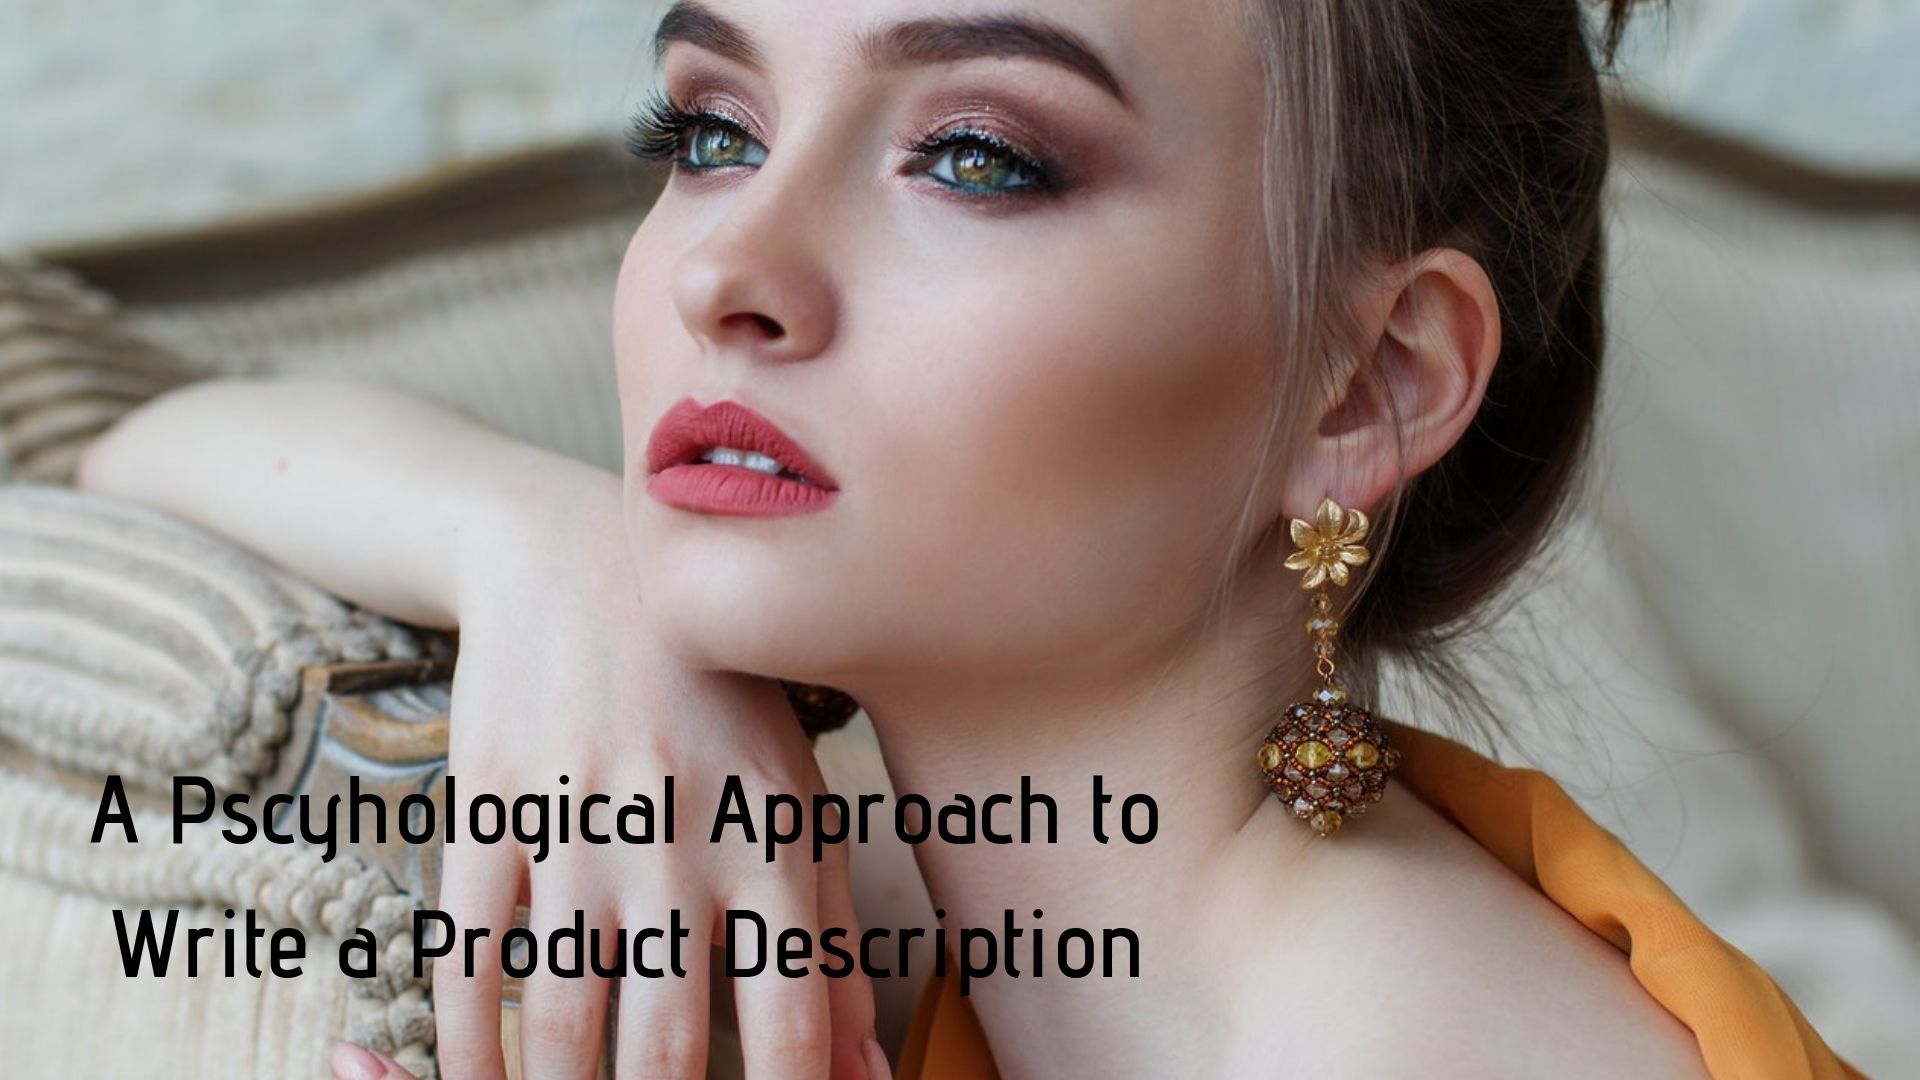 Use psychology theories to write a product description that sells